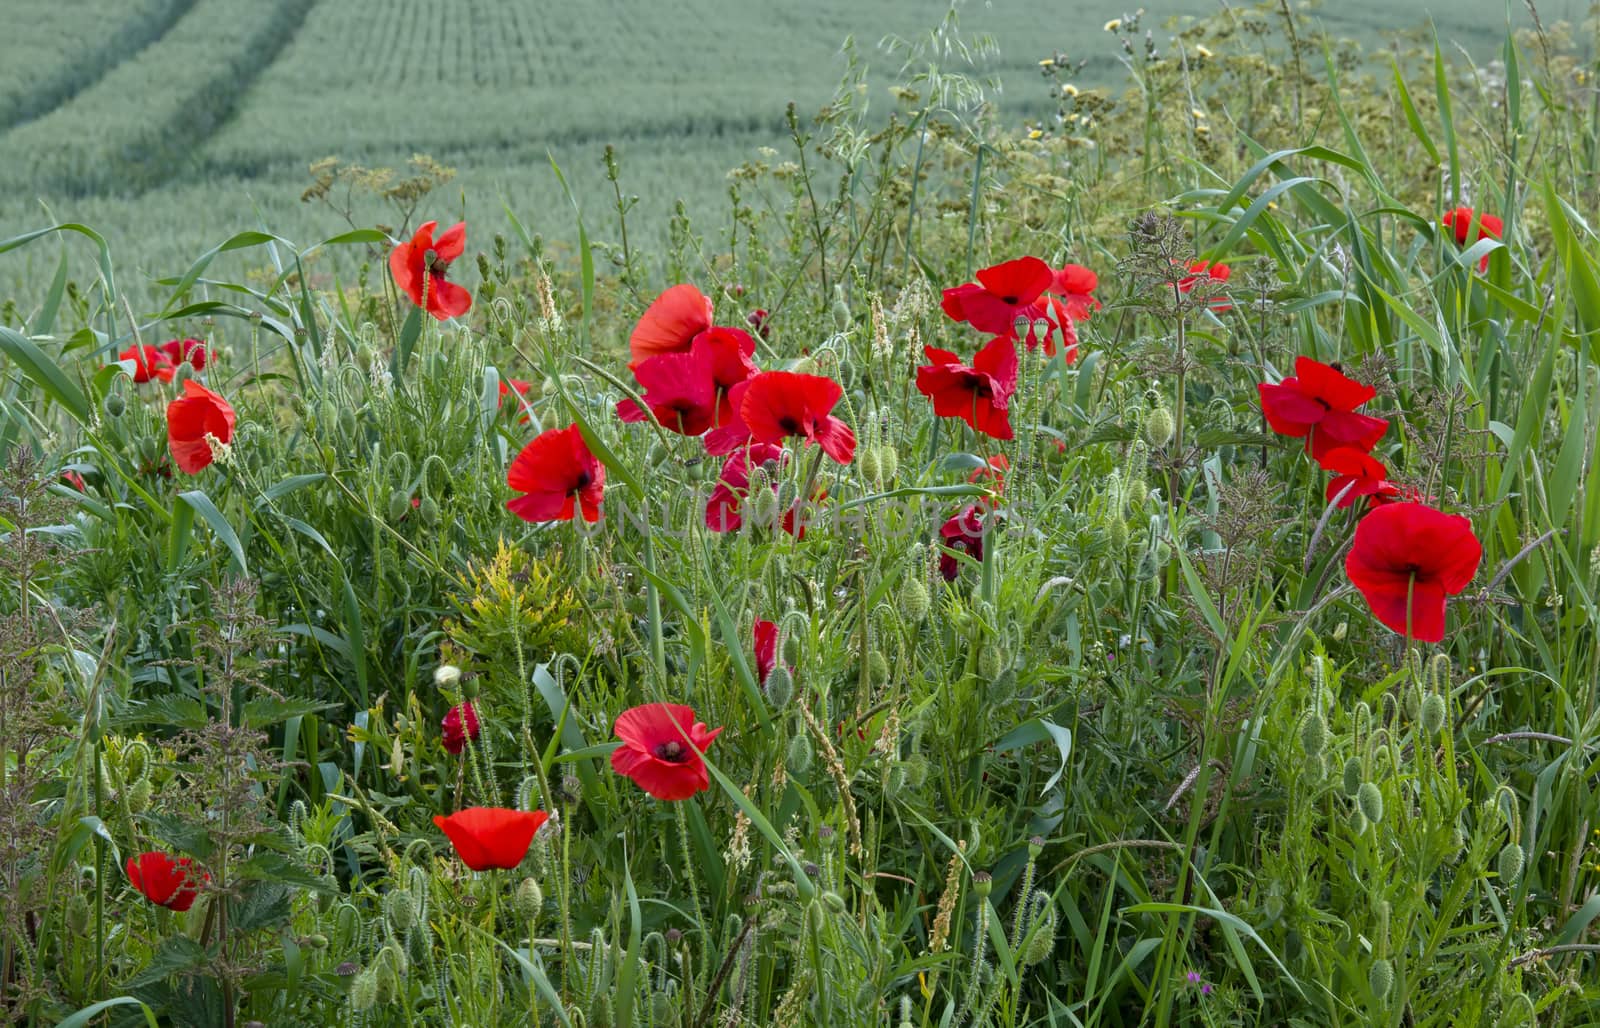 Poppies growing by crop field in southern England.